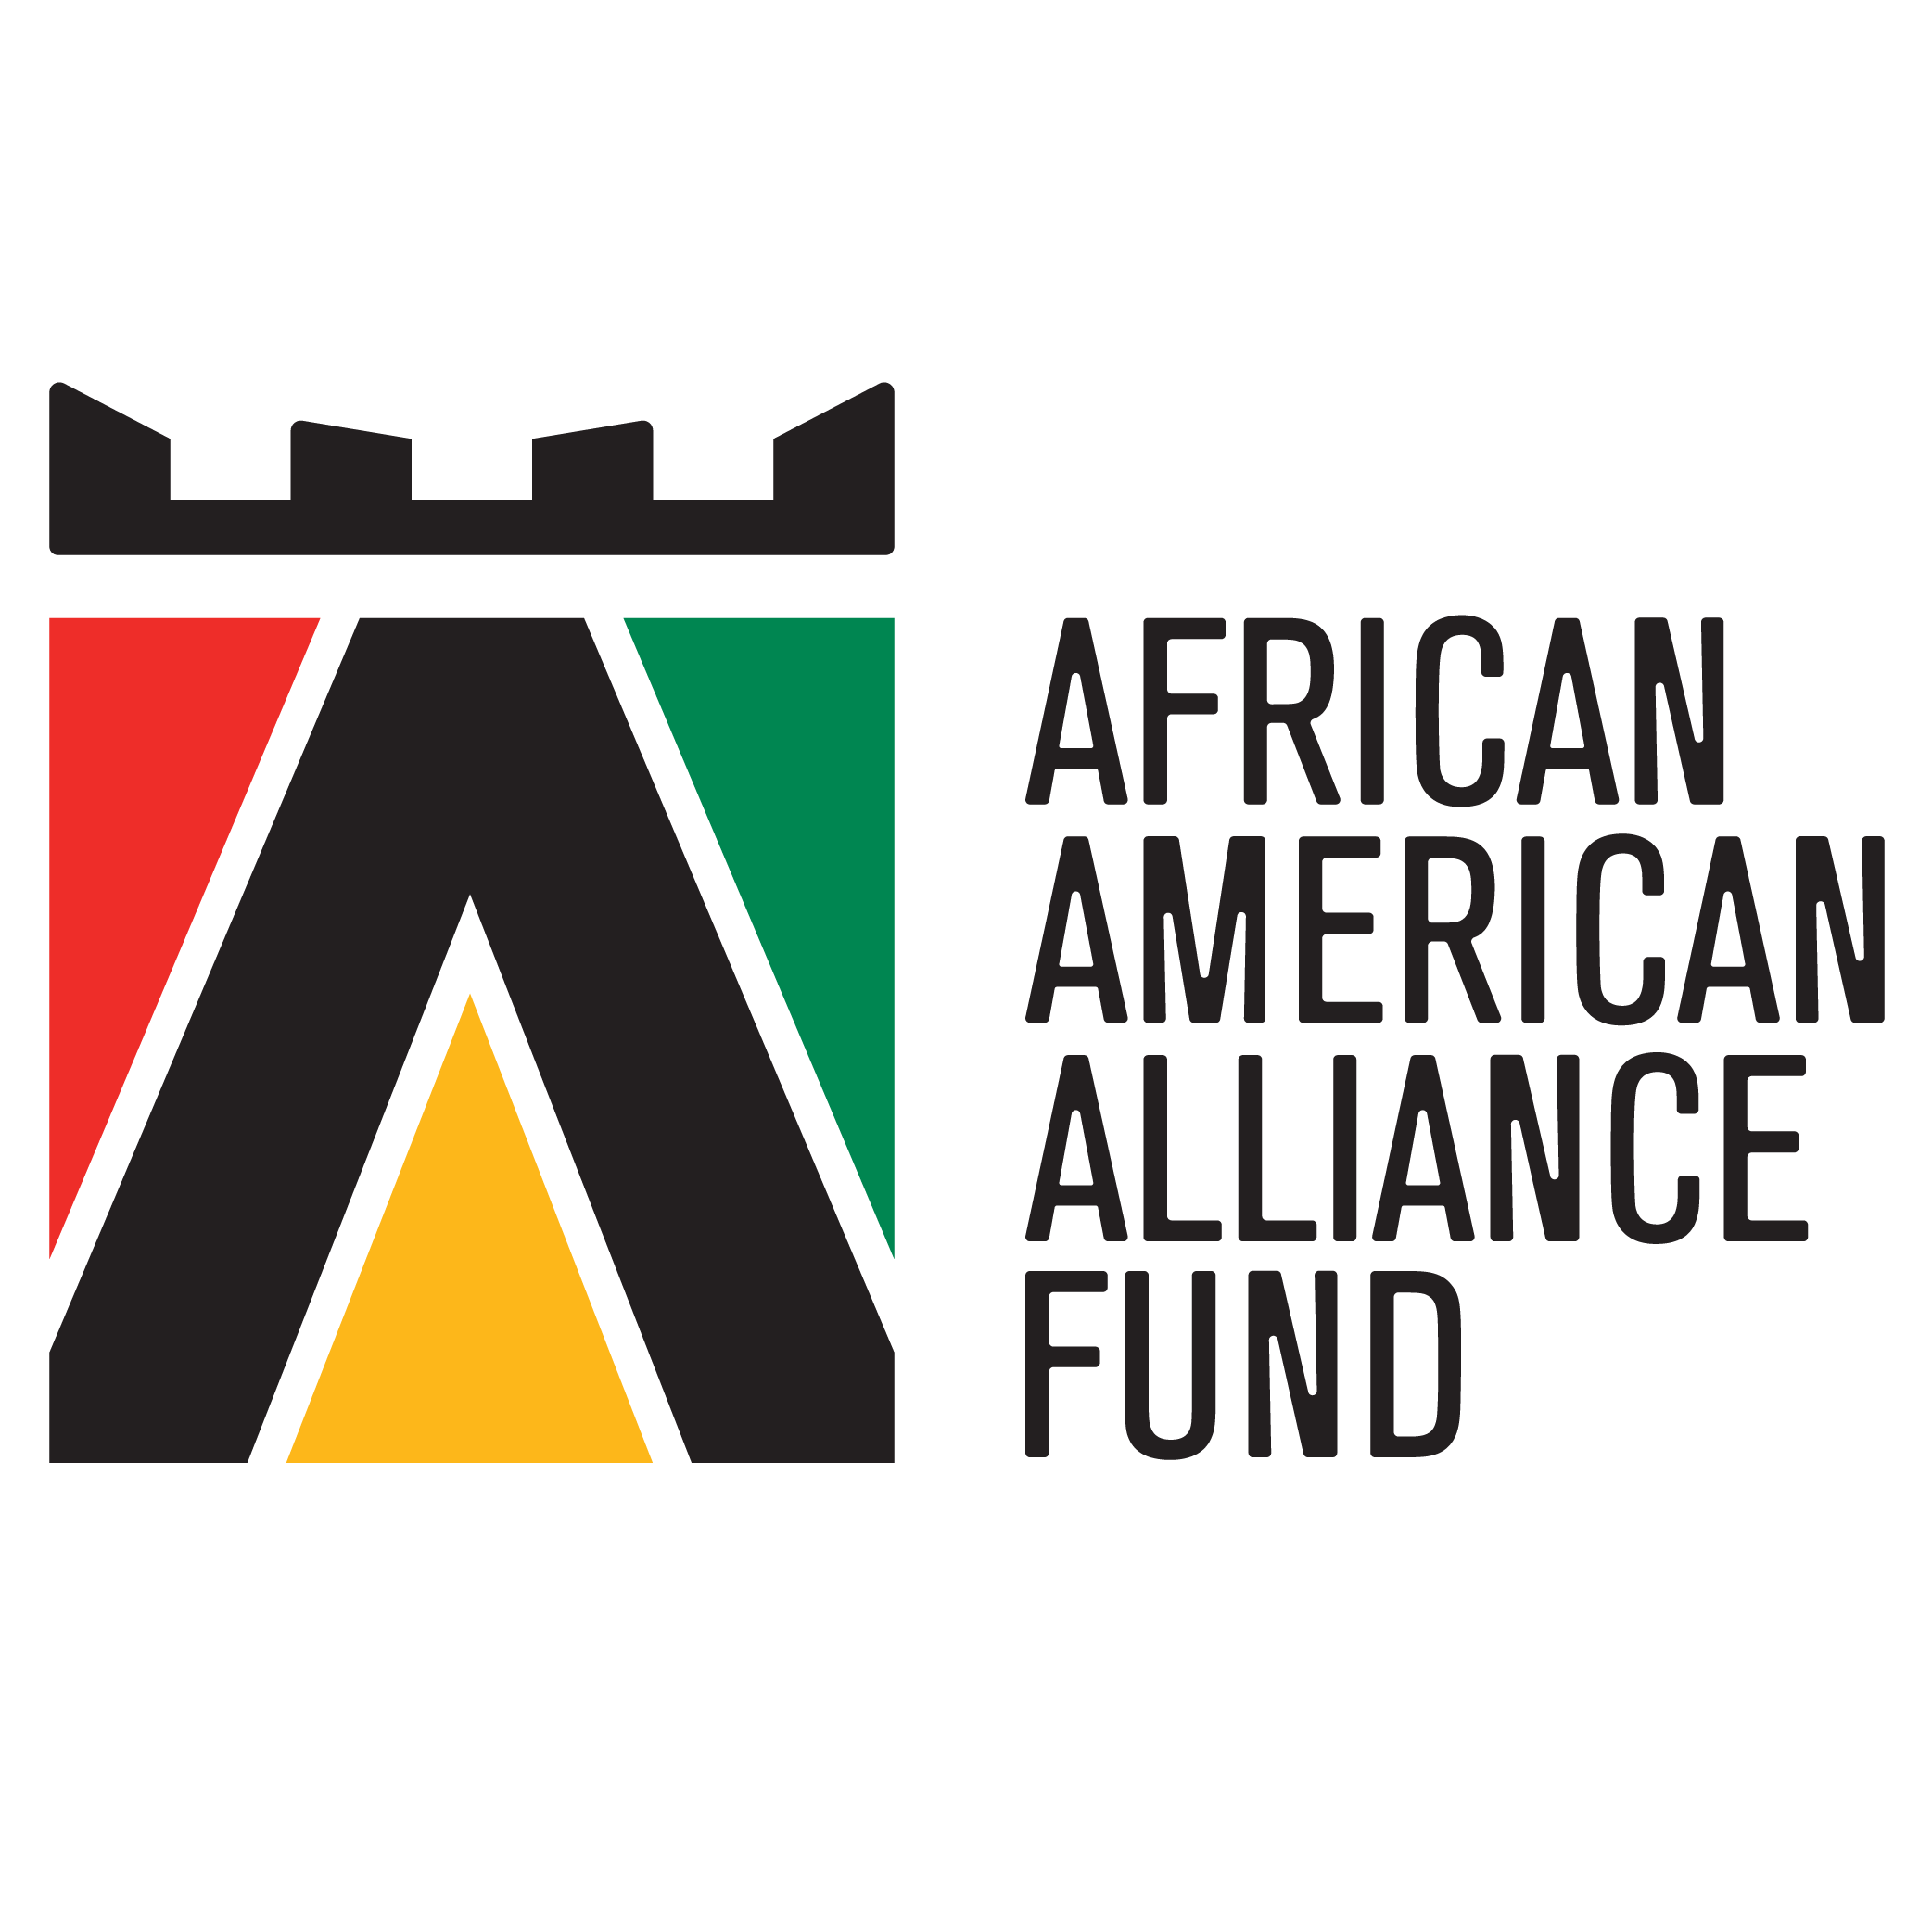 OCCF Announces New Round of Grants Totaling $120,000 From African American Alliance Fund